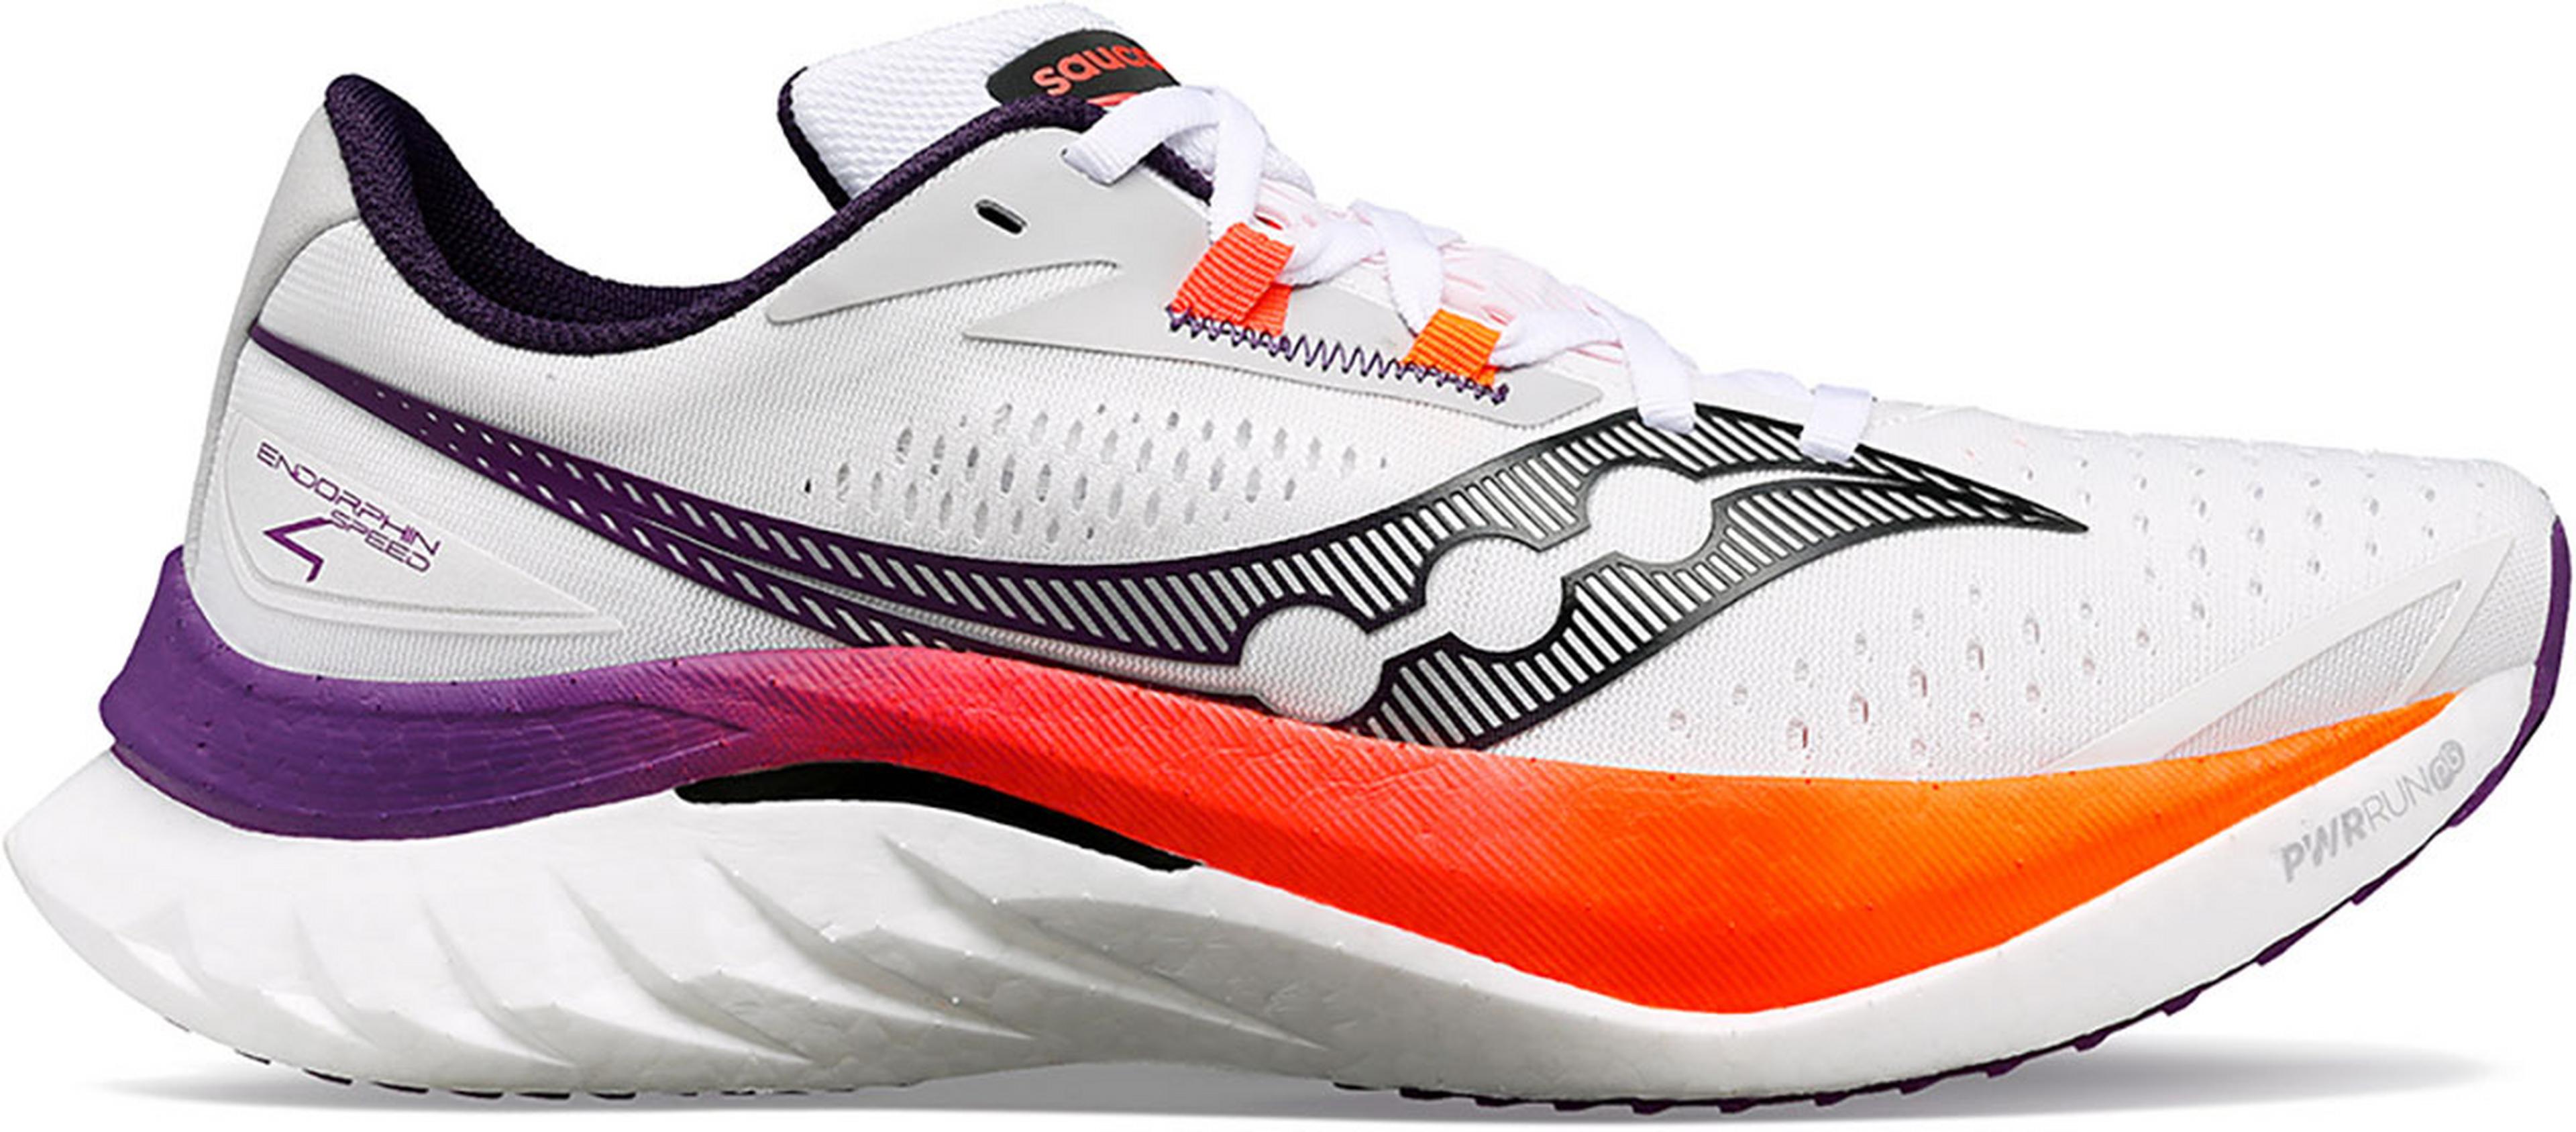 Saucony Endorphin Speed 4 Running Shoes